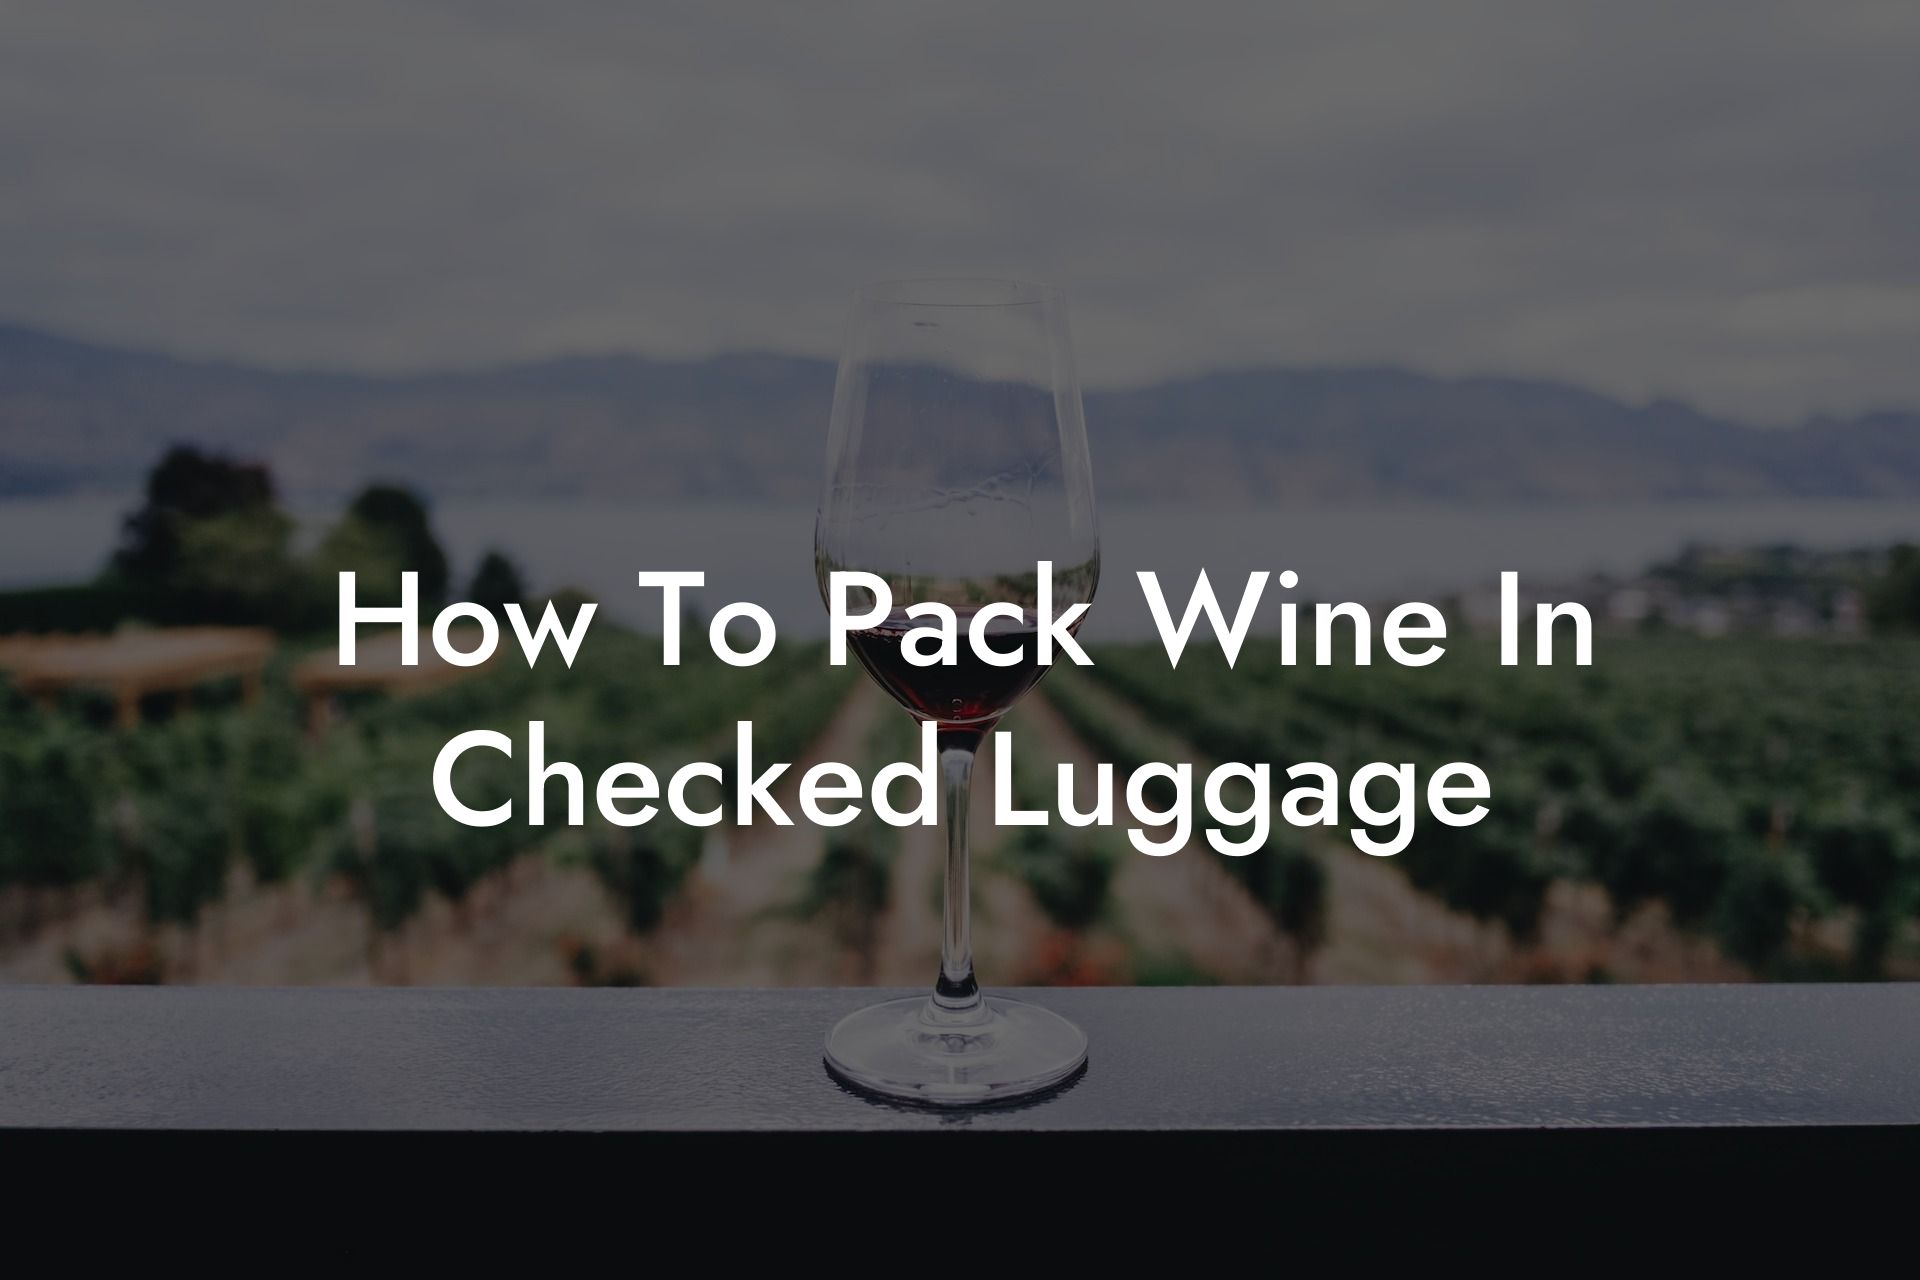 How To Pack Wine In Checked Luggage